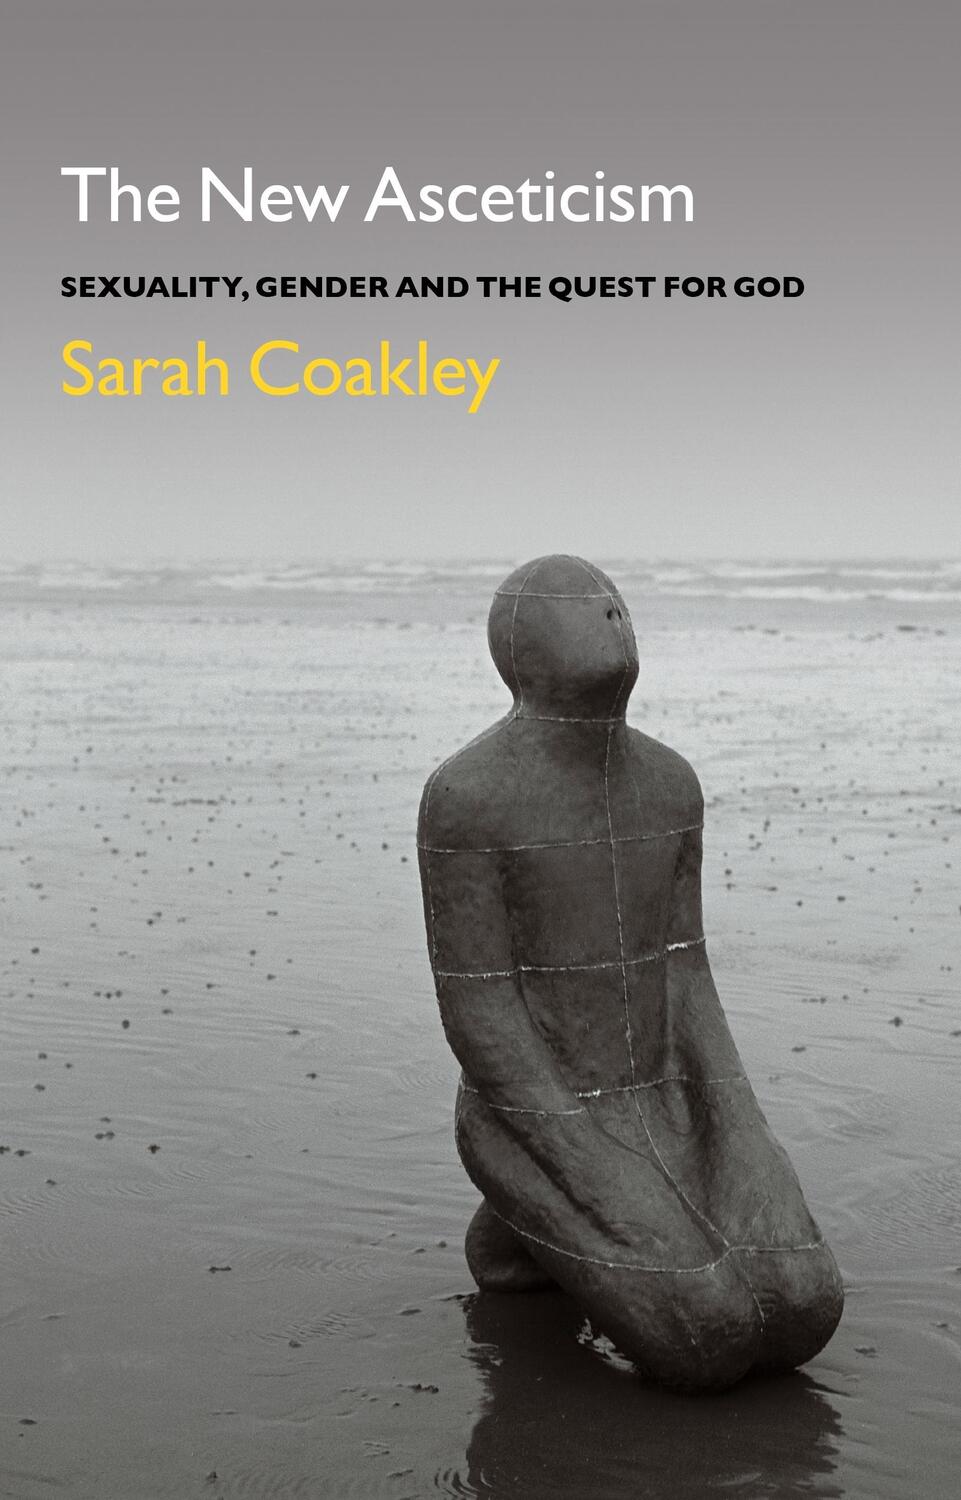 Autor: 9781441103222 | The New Asceticism | Sexuality, Gender and the Quest for God | Coakley